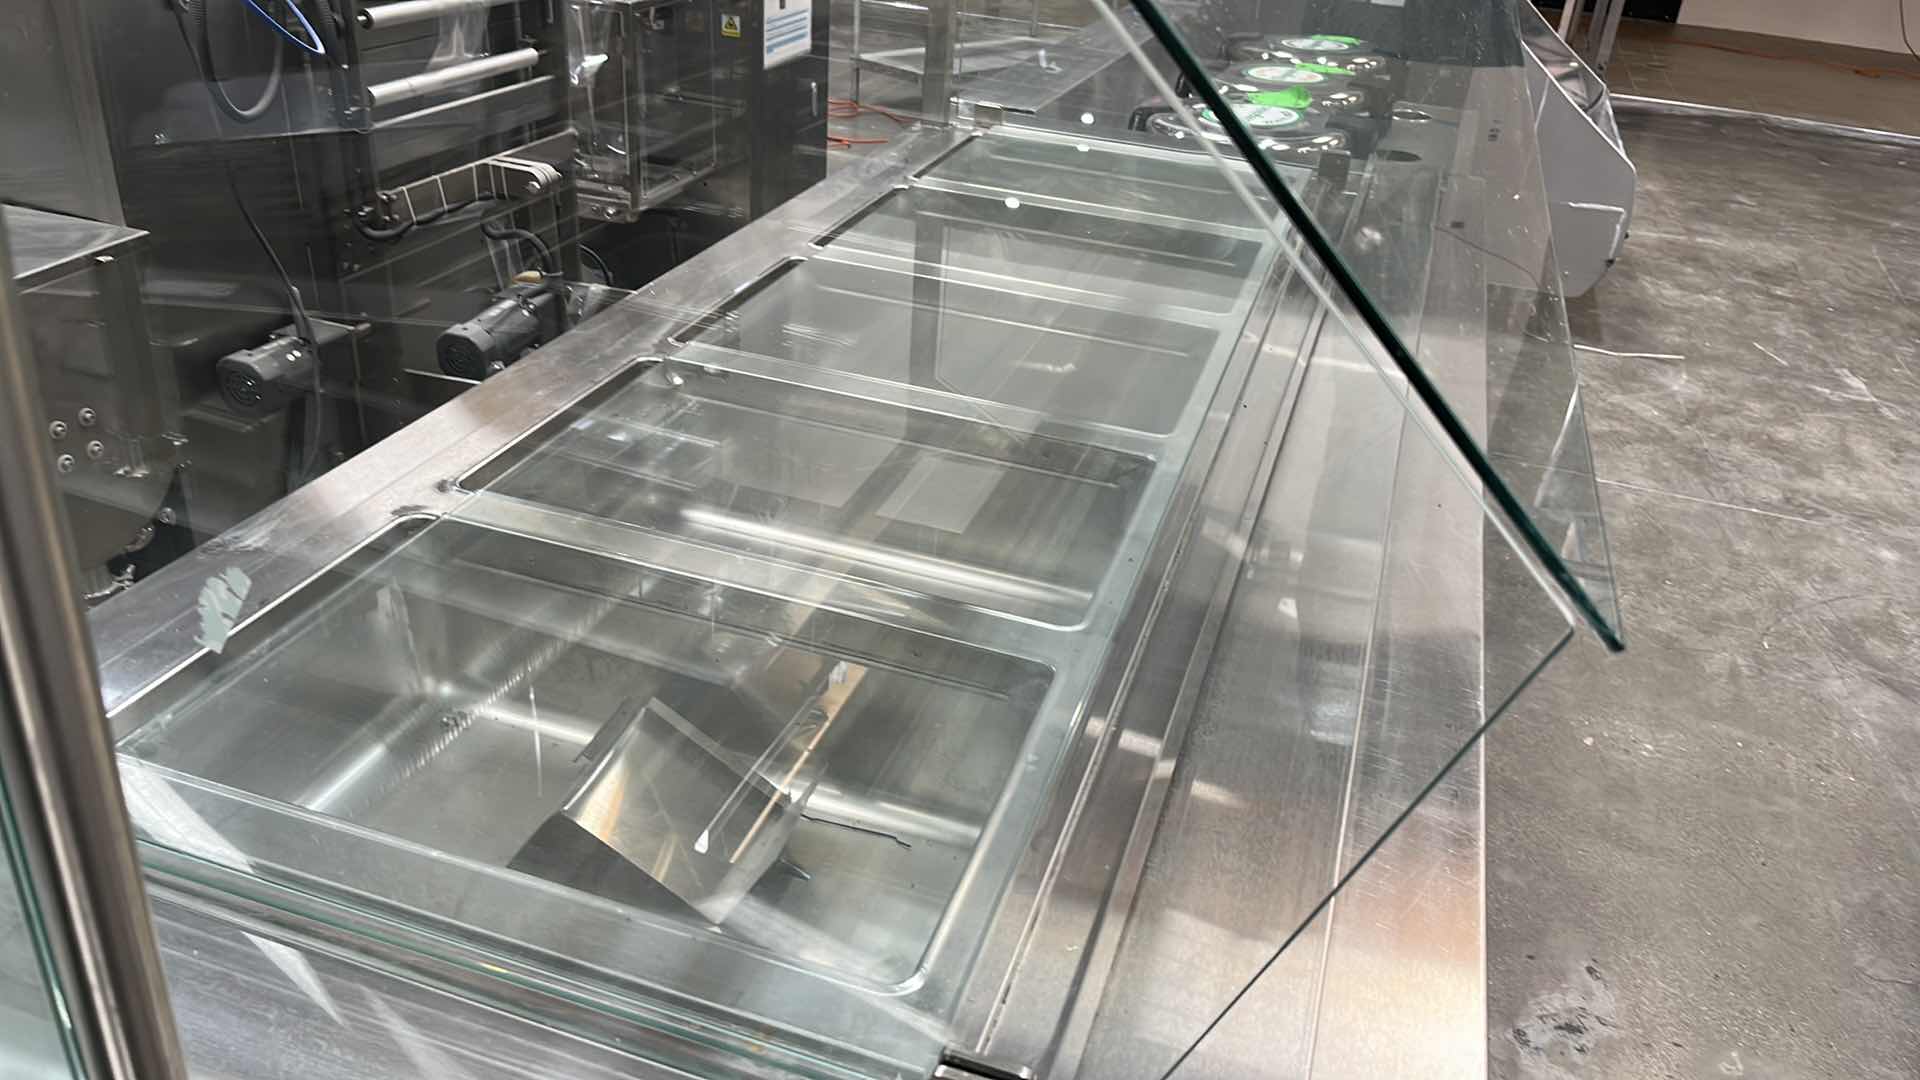 Photo 2 of HUSSMANN COMMERCIAL SELF-SERVICE FOOD COUNTER W HOT WELLS (MODEL IM-05-I7-FH)